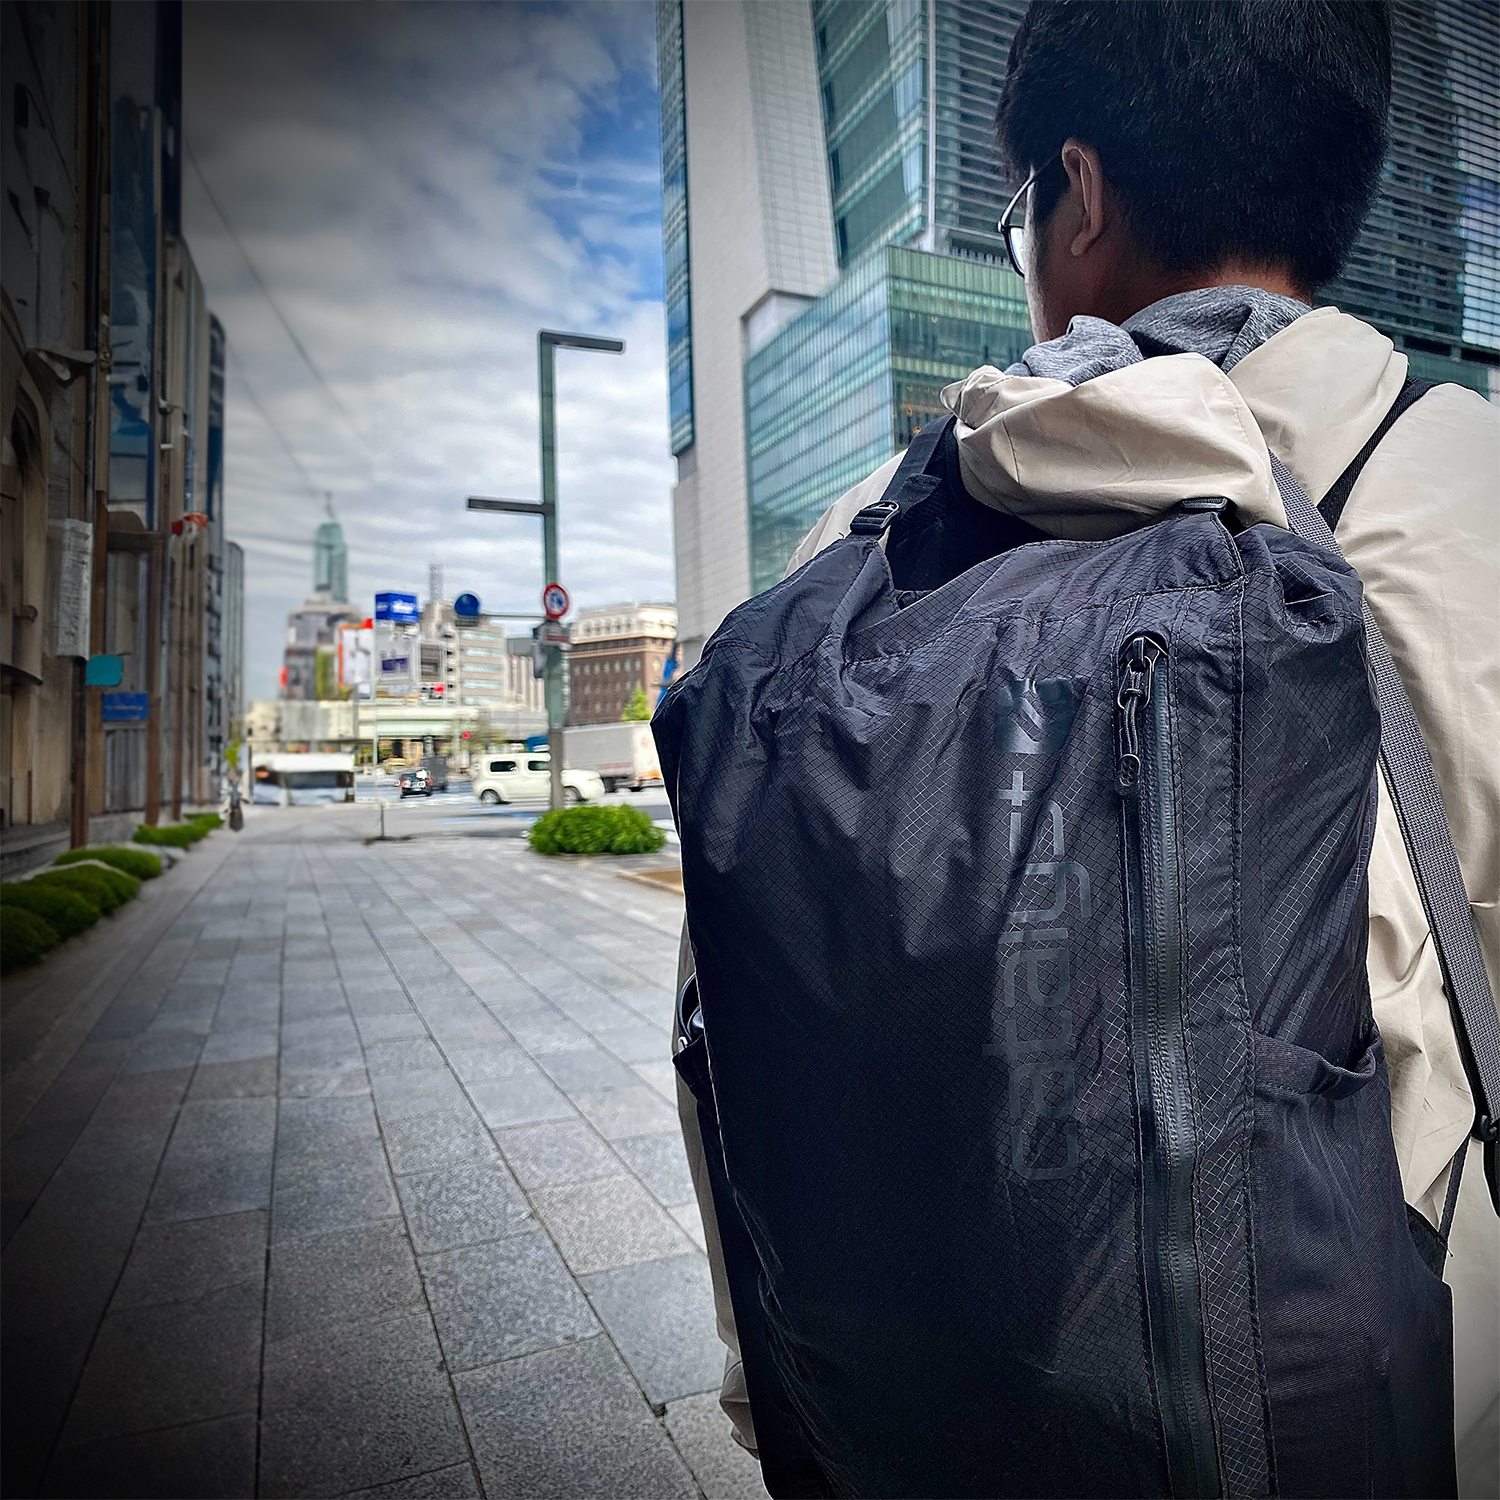 catalyst waterproof 20l backpack man in the city with the backpack